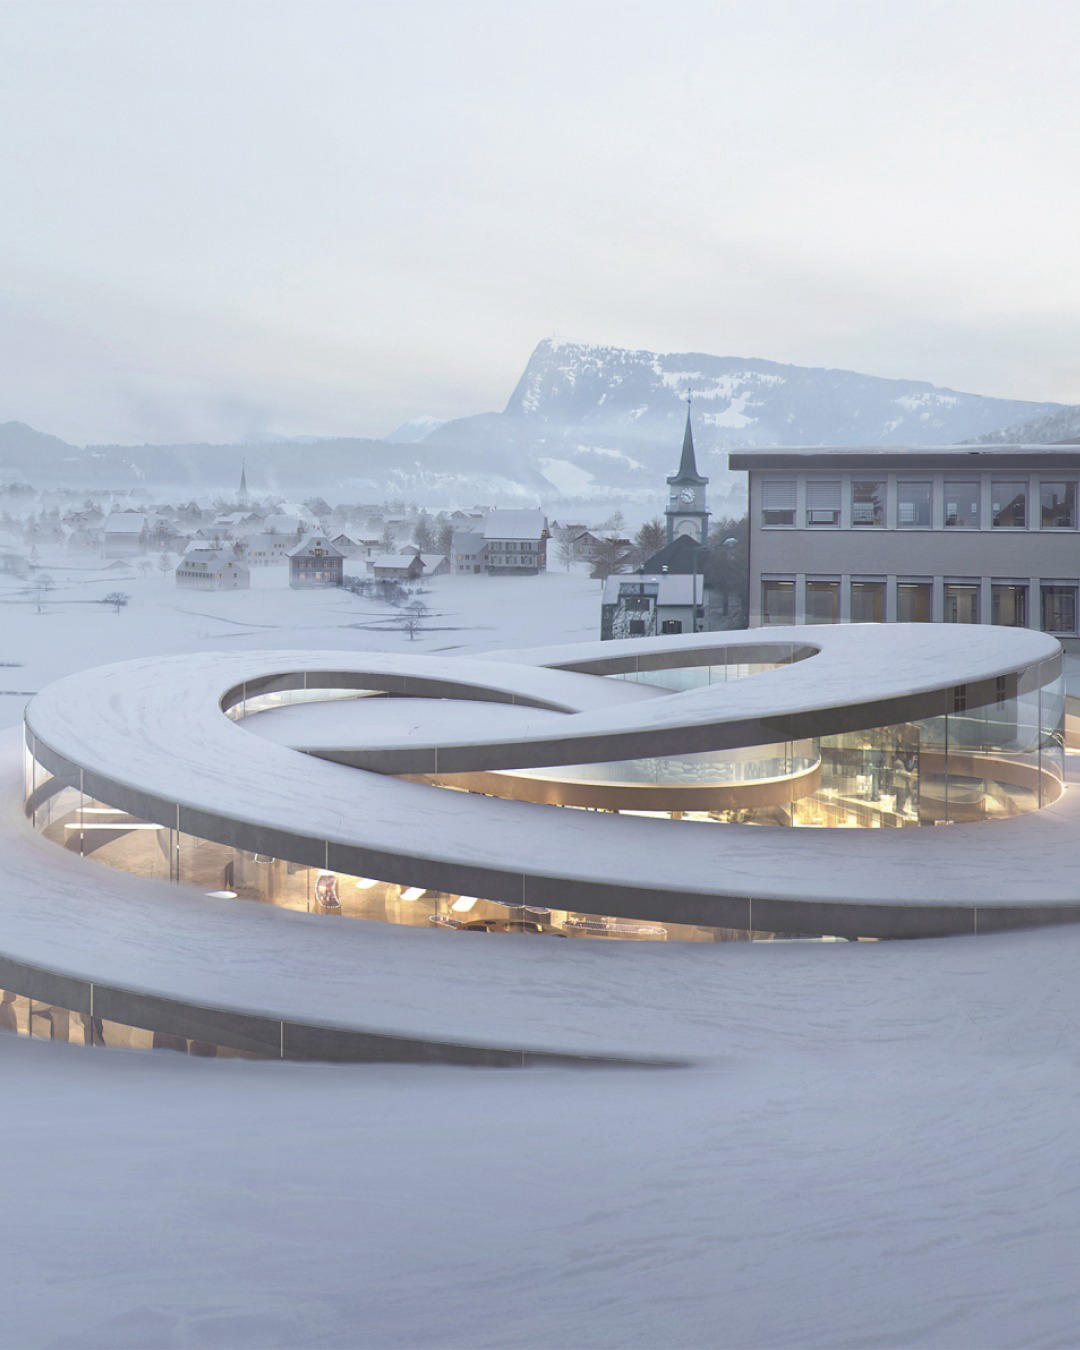 Audemars Piguet - Nestled in the heart of the Vallée de Joux, the birthplace of fine watchmaking, th